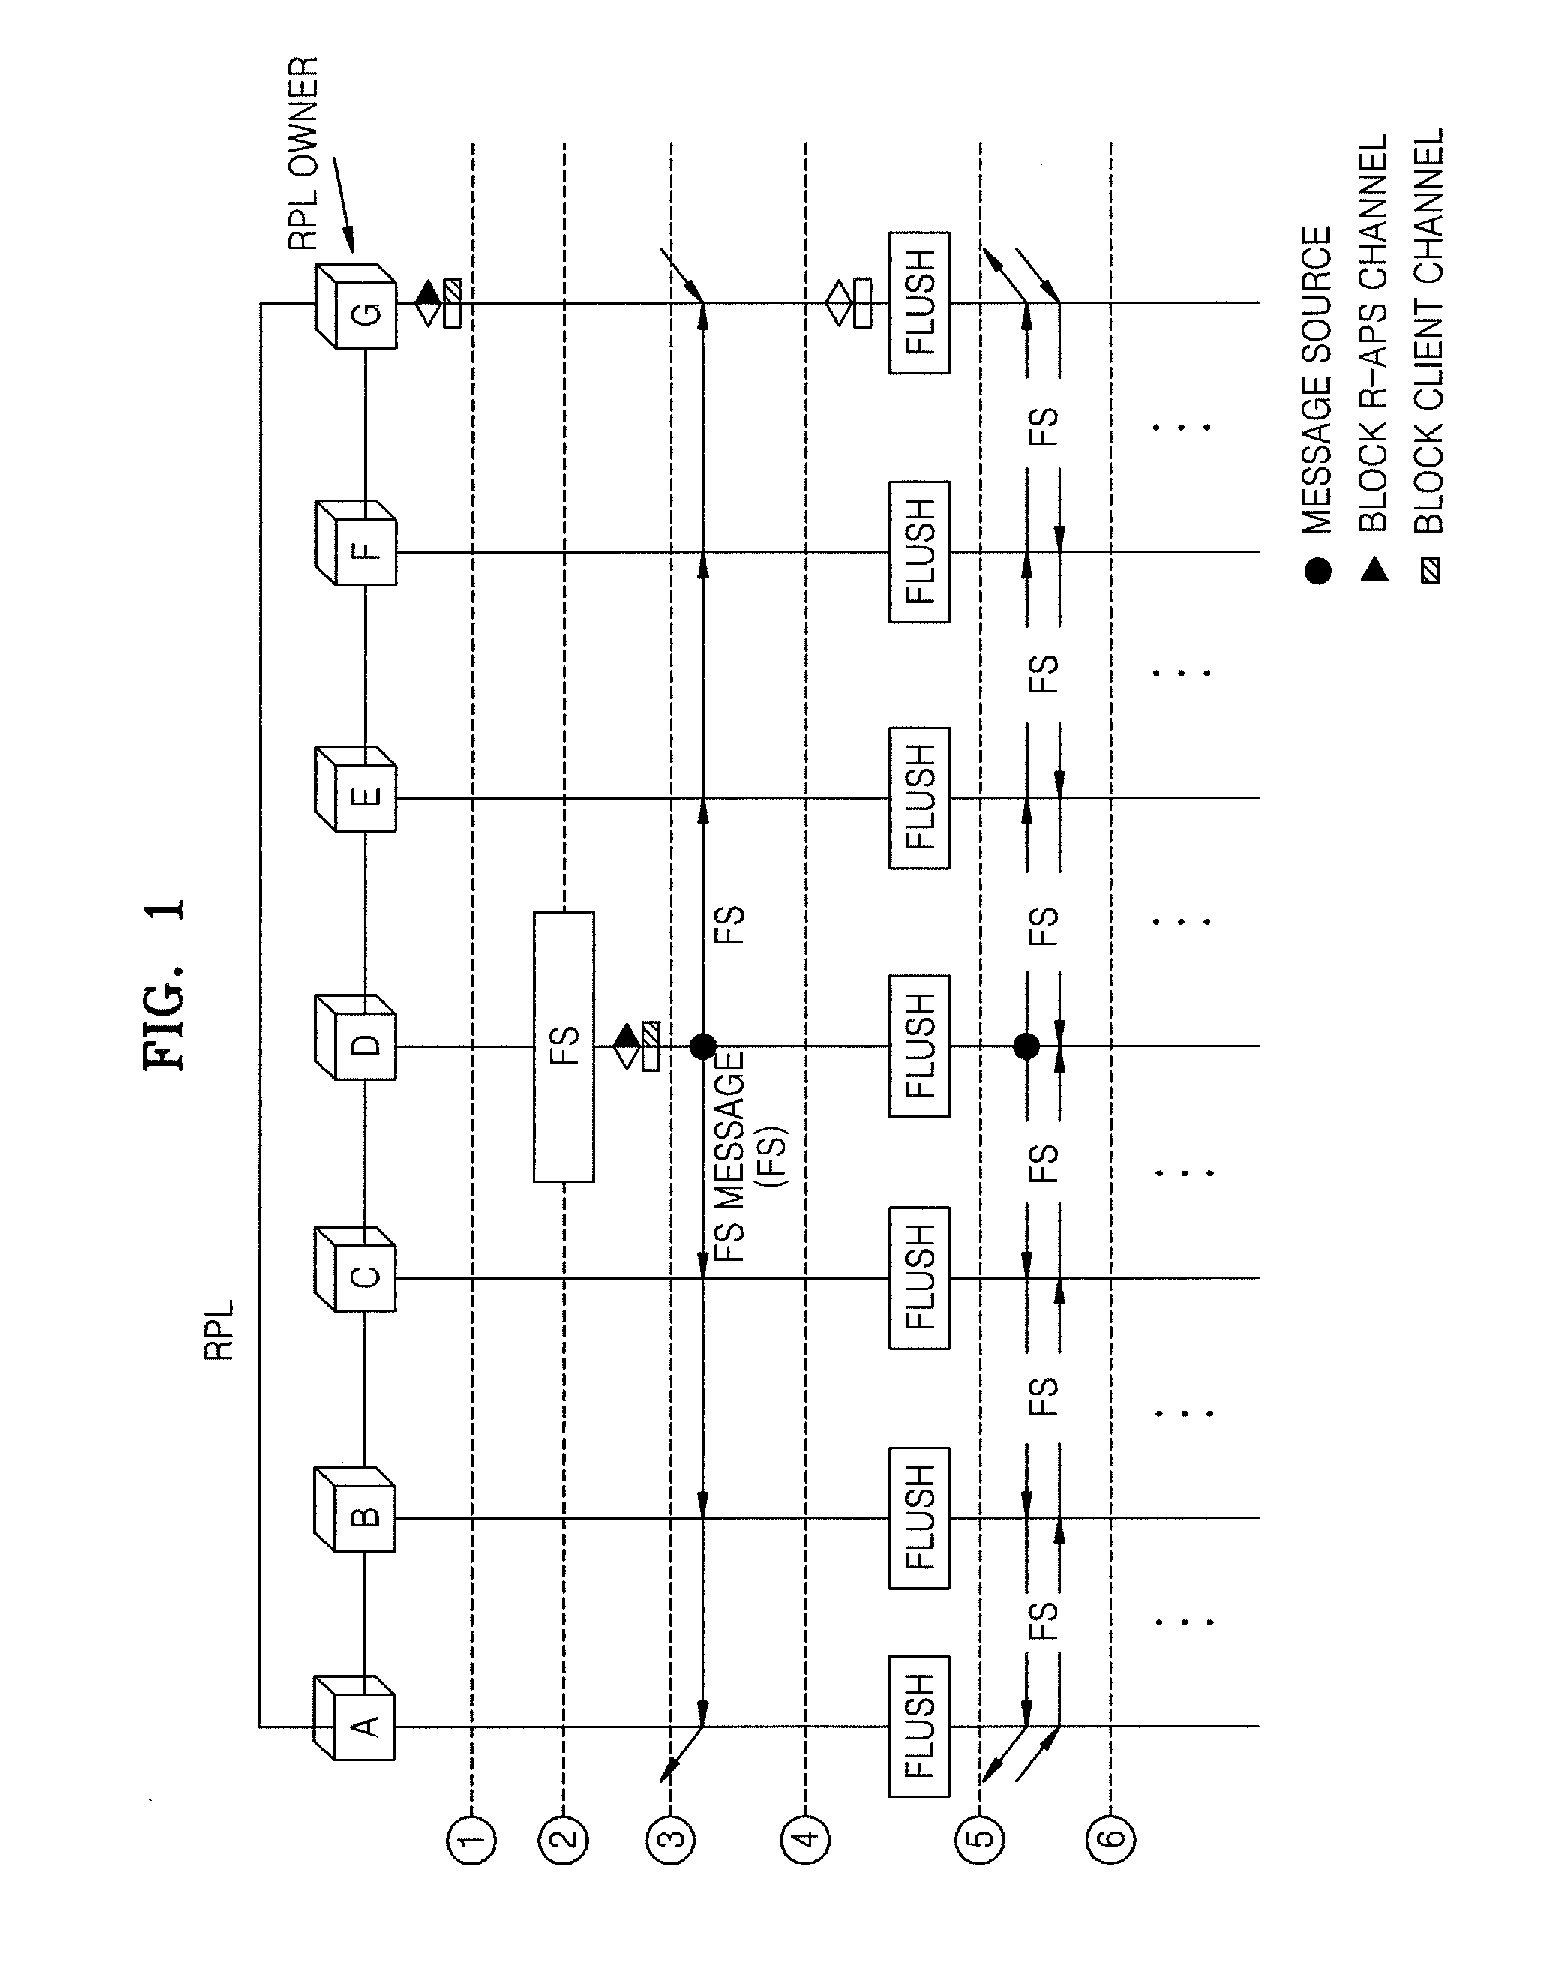 Force protection switching method in ethernet ring network